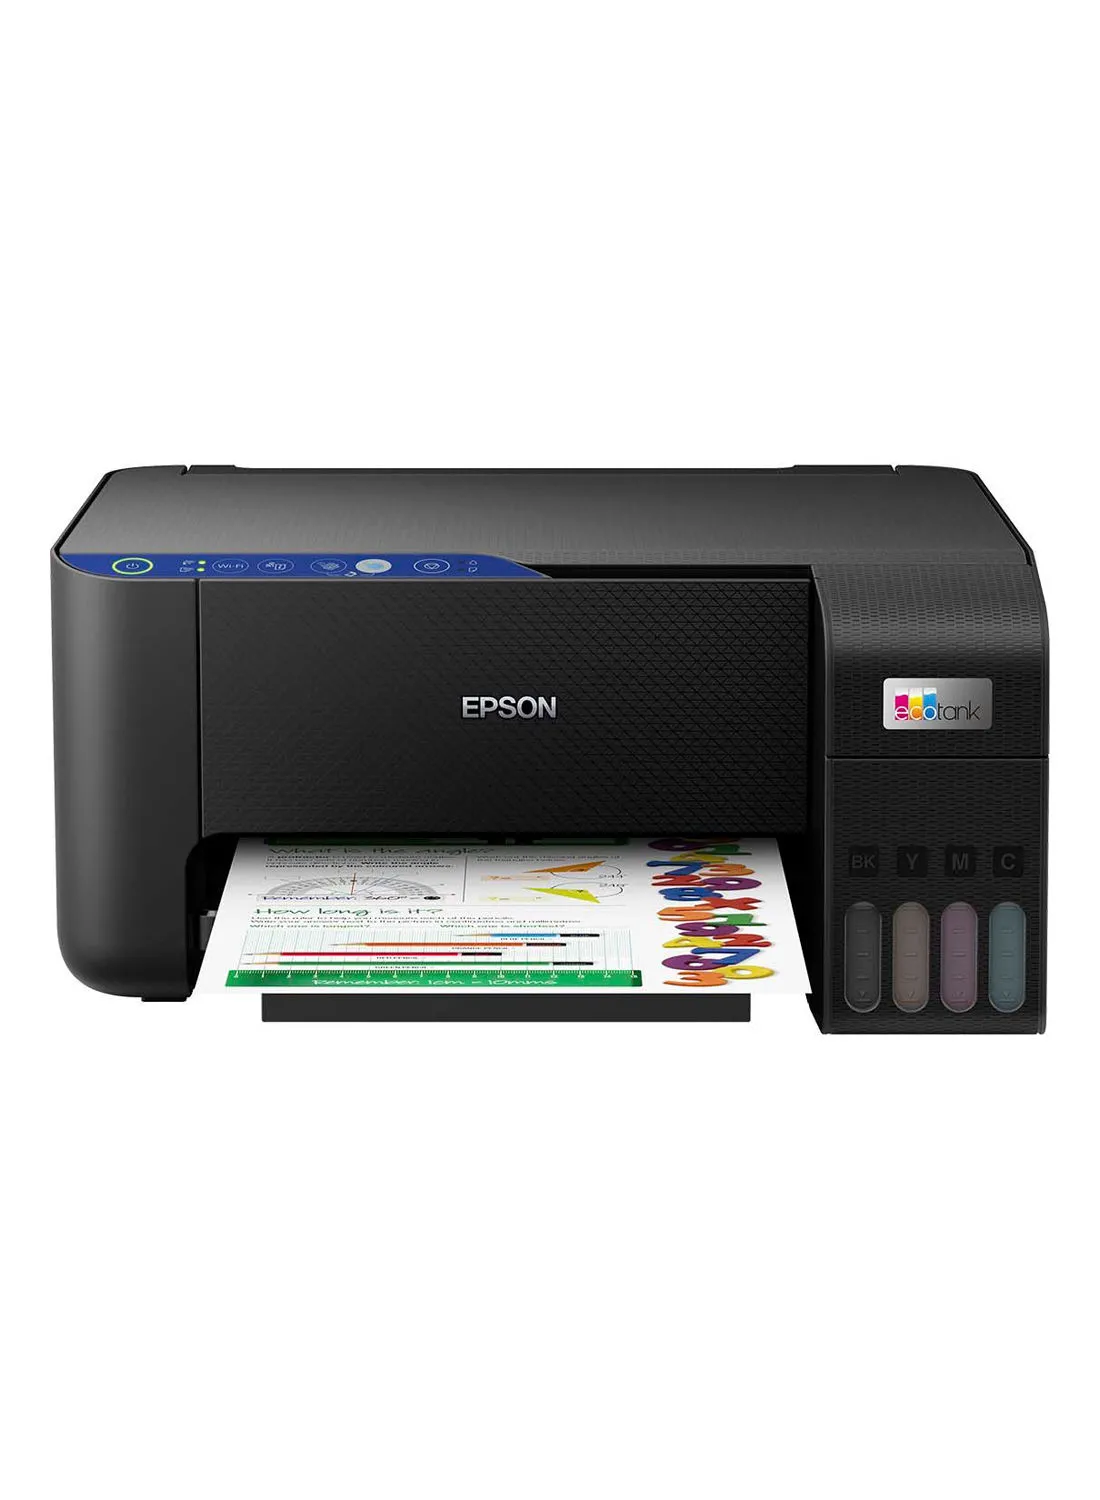 EPSON Ecotank L3251 Home Ink Tank Printer, A4 Color 3-in-1 Printer with Wi-Fi Direct, 5760 x 1440 DPI Resolution, 10 Pages/min Print Speed, USB/WiFi, 100 Sheets Paper Tray Capacity Black